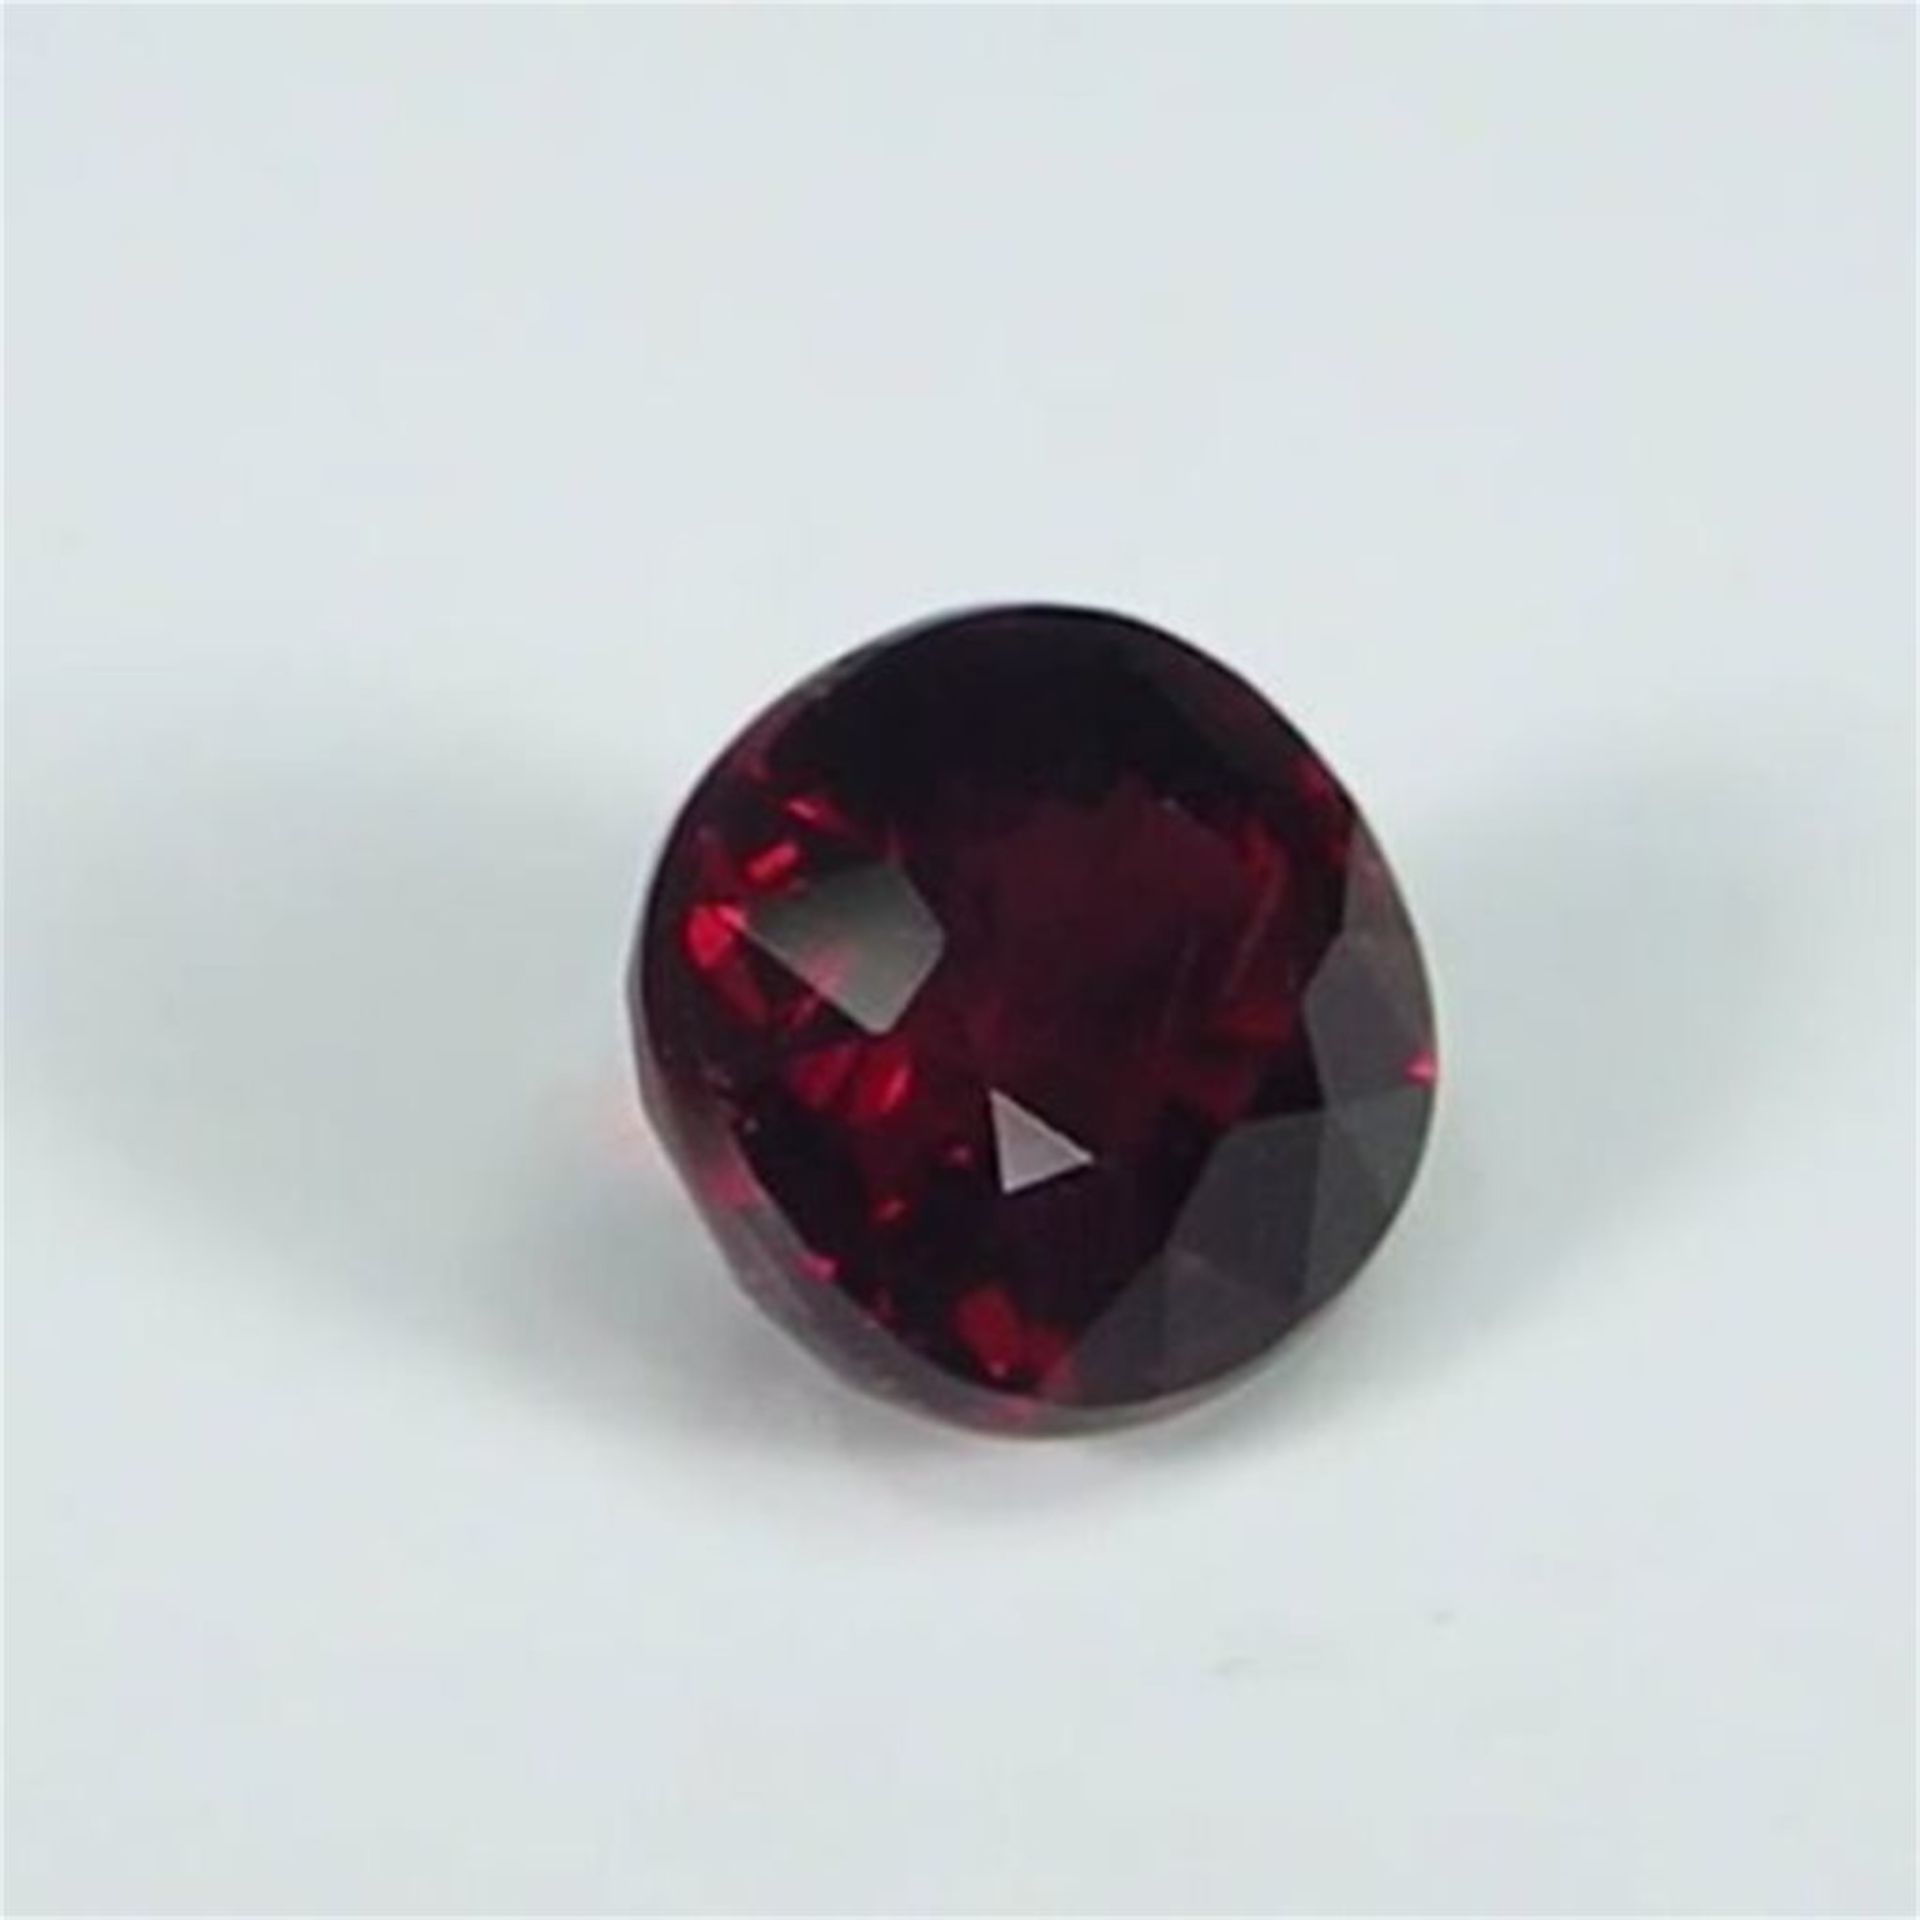 GIA Certified 1.09 ct. Untreated Pigeon’s Blood Ruby - BURMA - Image 8 of 10